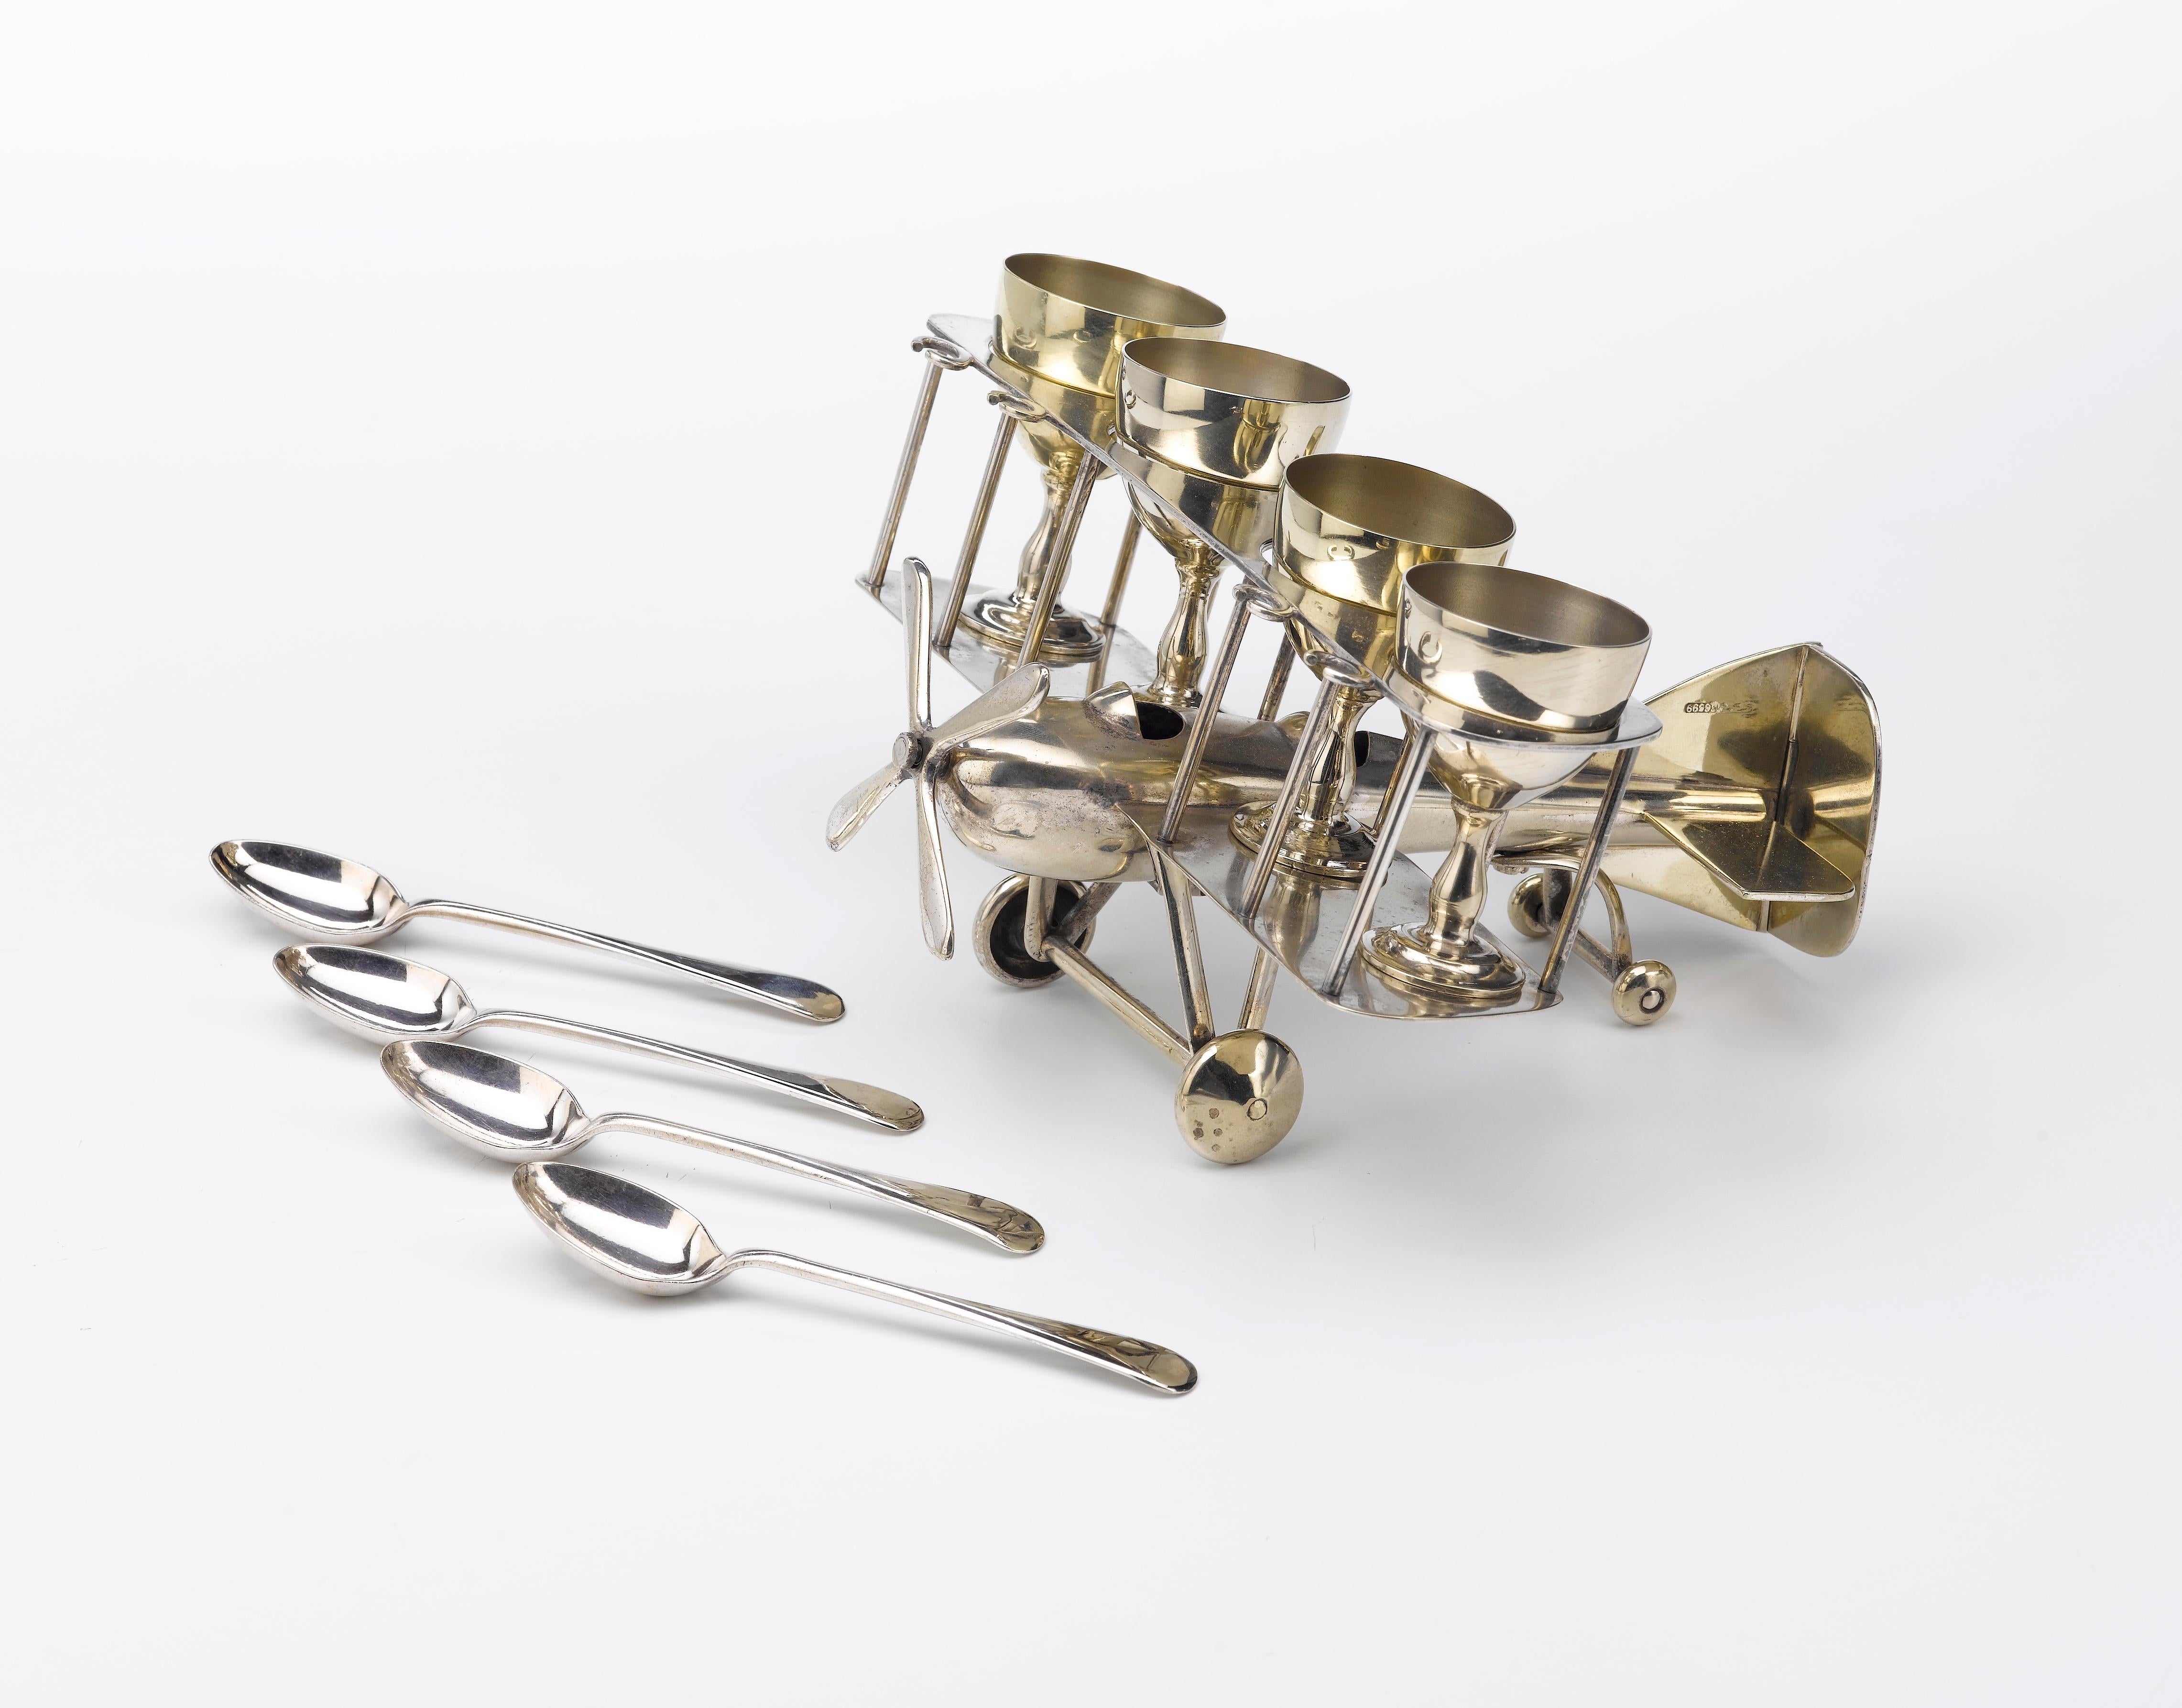 Early 20th Century Silver Plated Airplane-Themed Tableware, circa 1910 For Sale